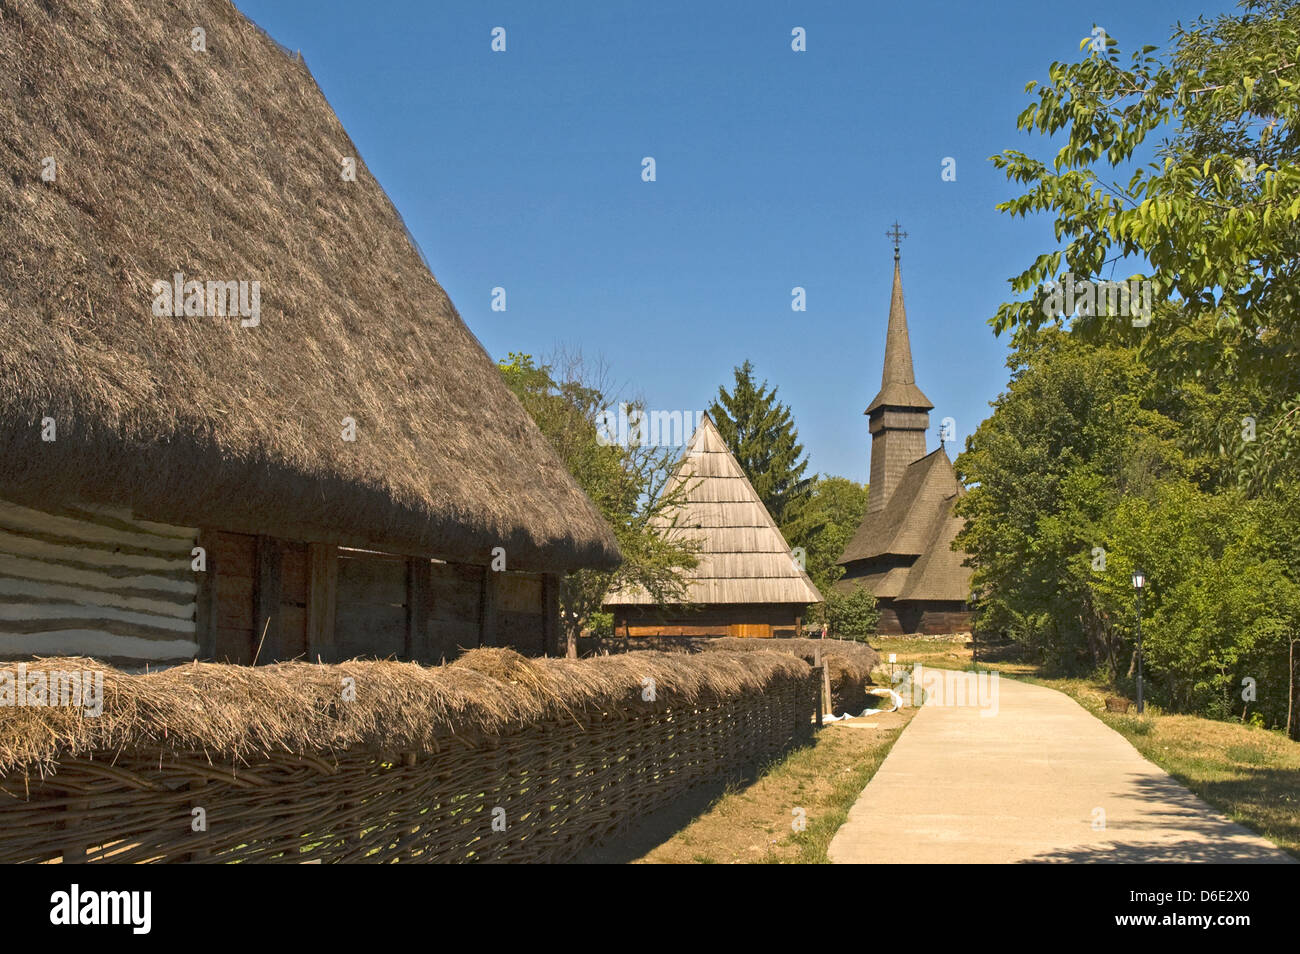 EUROPE, ROMANIA, Bucharest, Herastrau Park Folk Museum, view of the site with traditional Orthodox Church Stock Photo